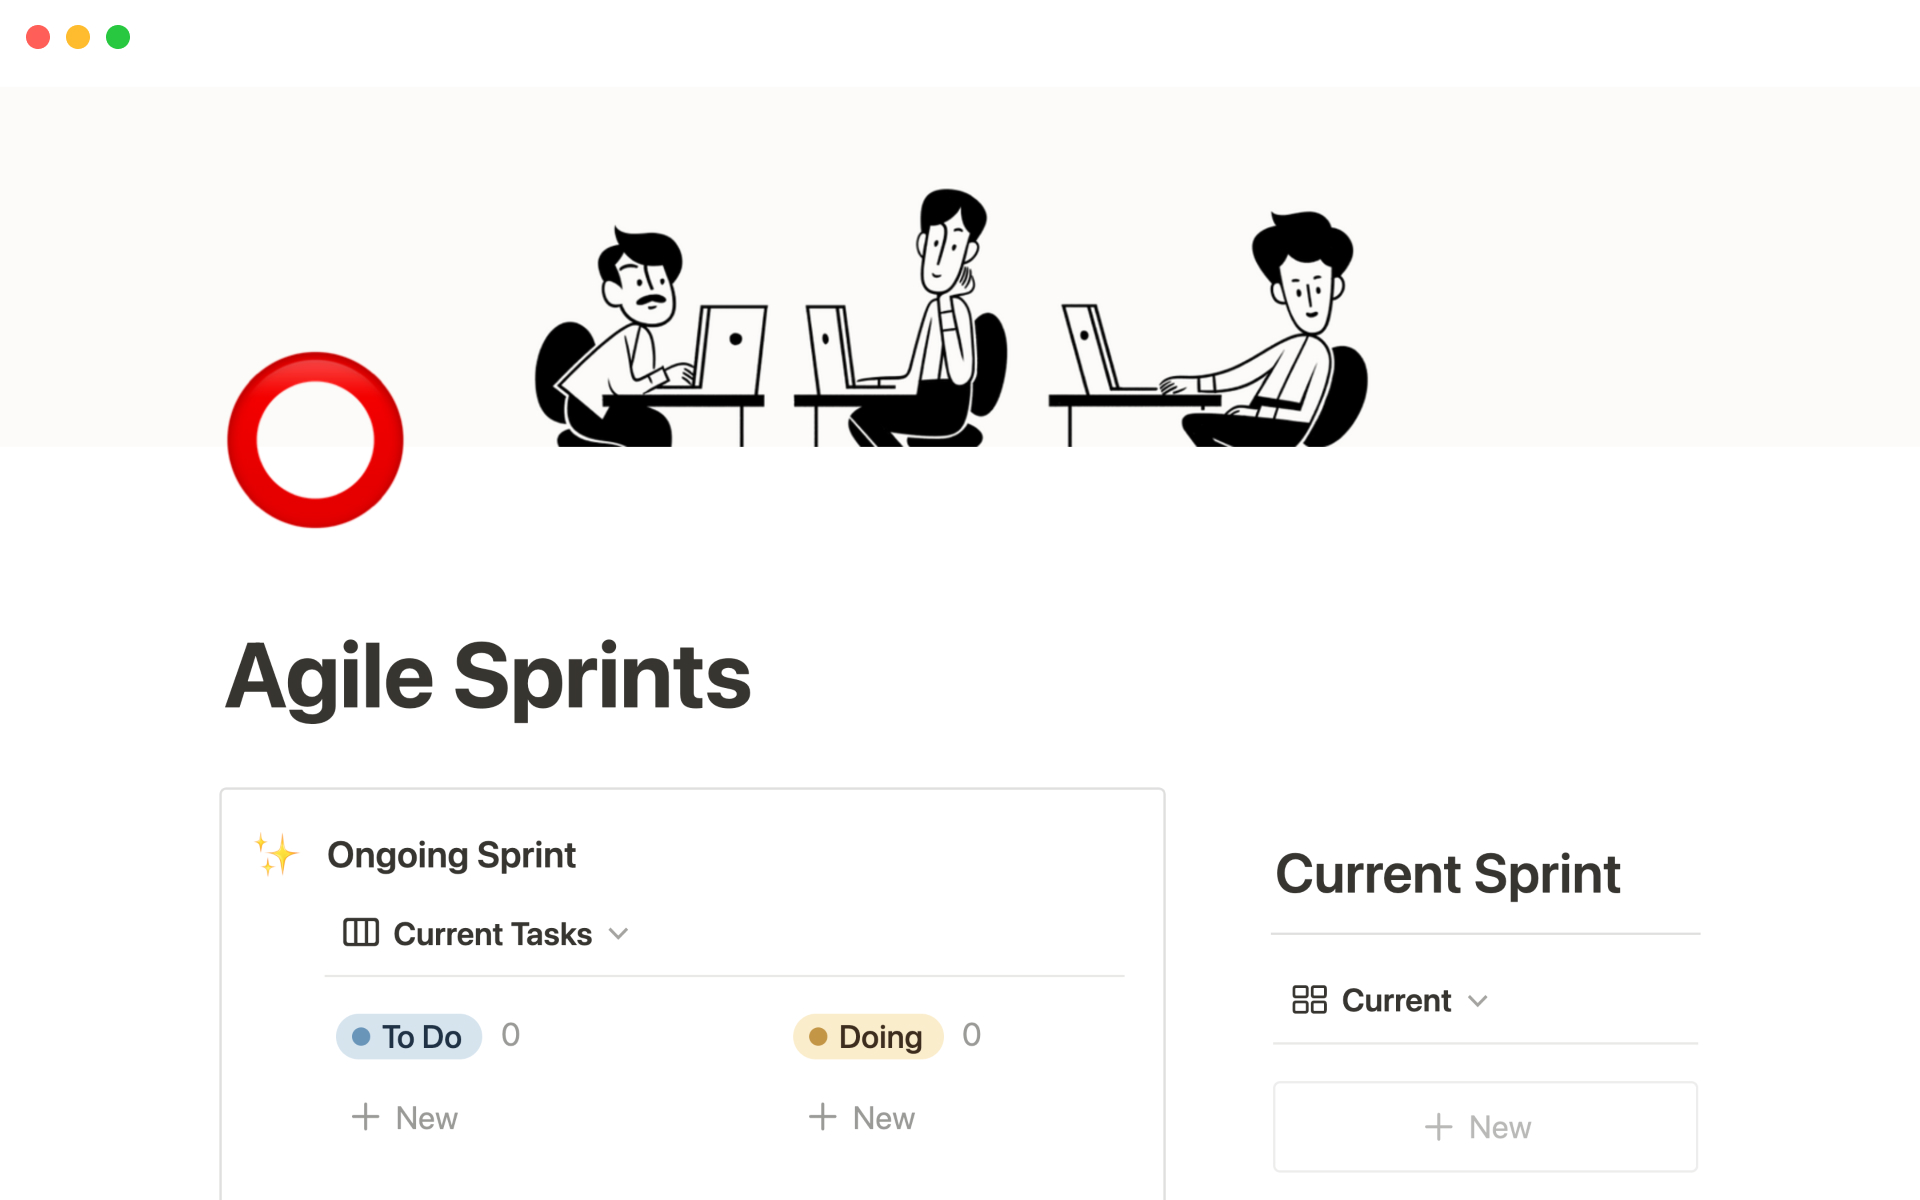 Provides small teams with a sprint framework to get work done.